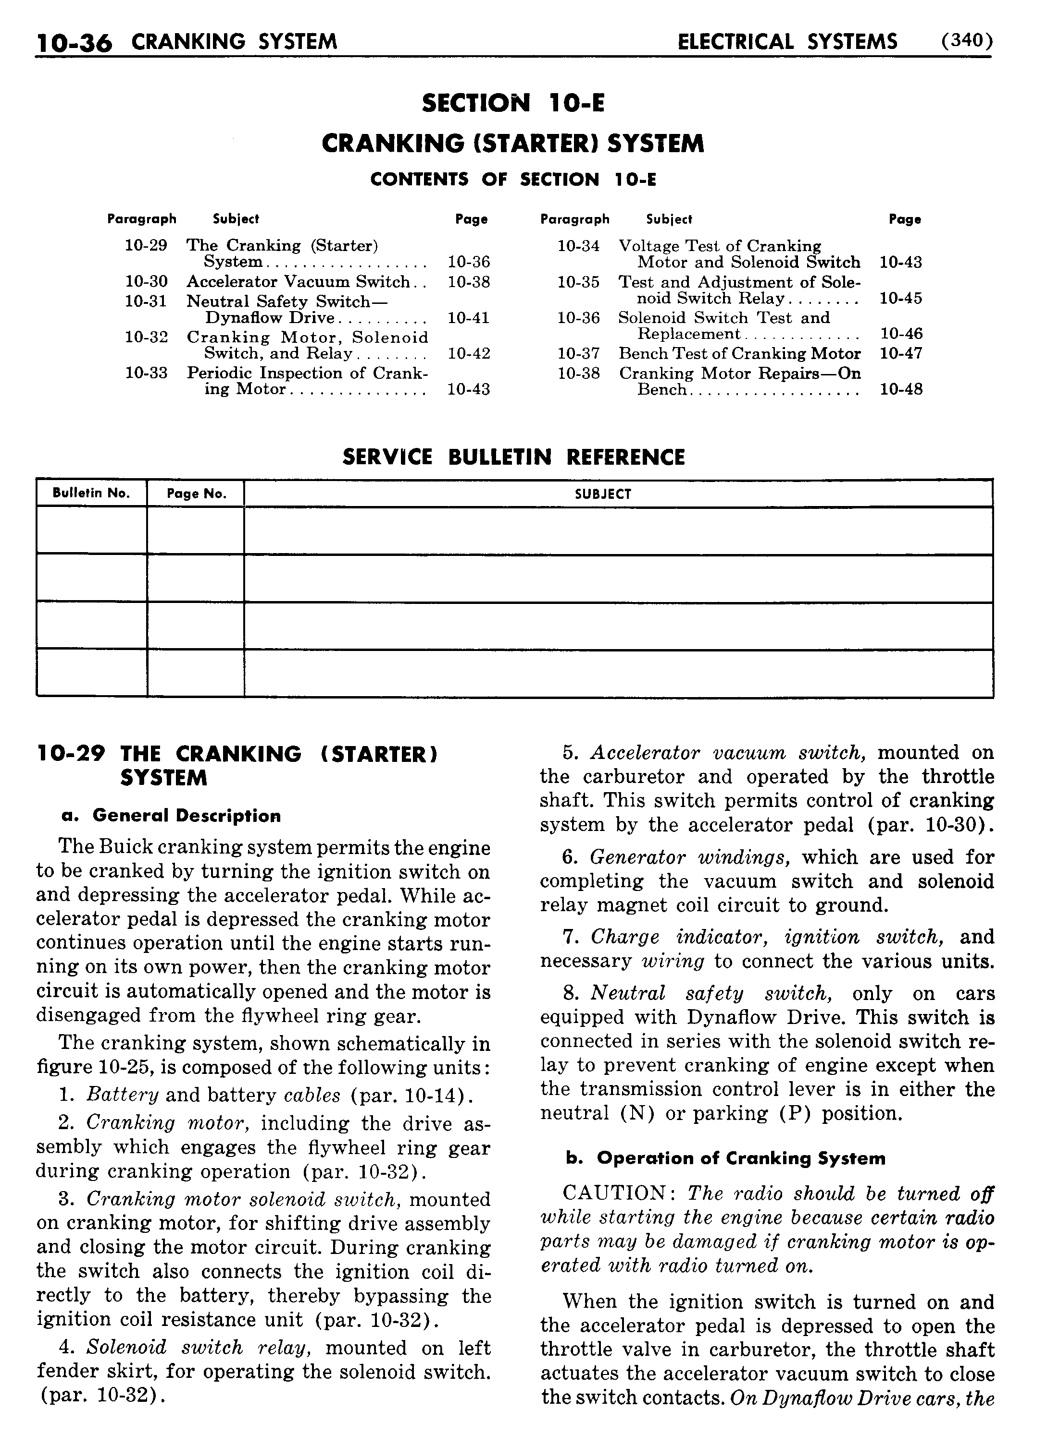 n_11 1955 Buick Shop Manual - Electrical Systems-036-036.jpg